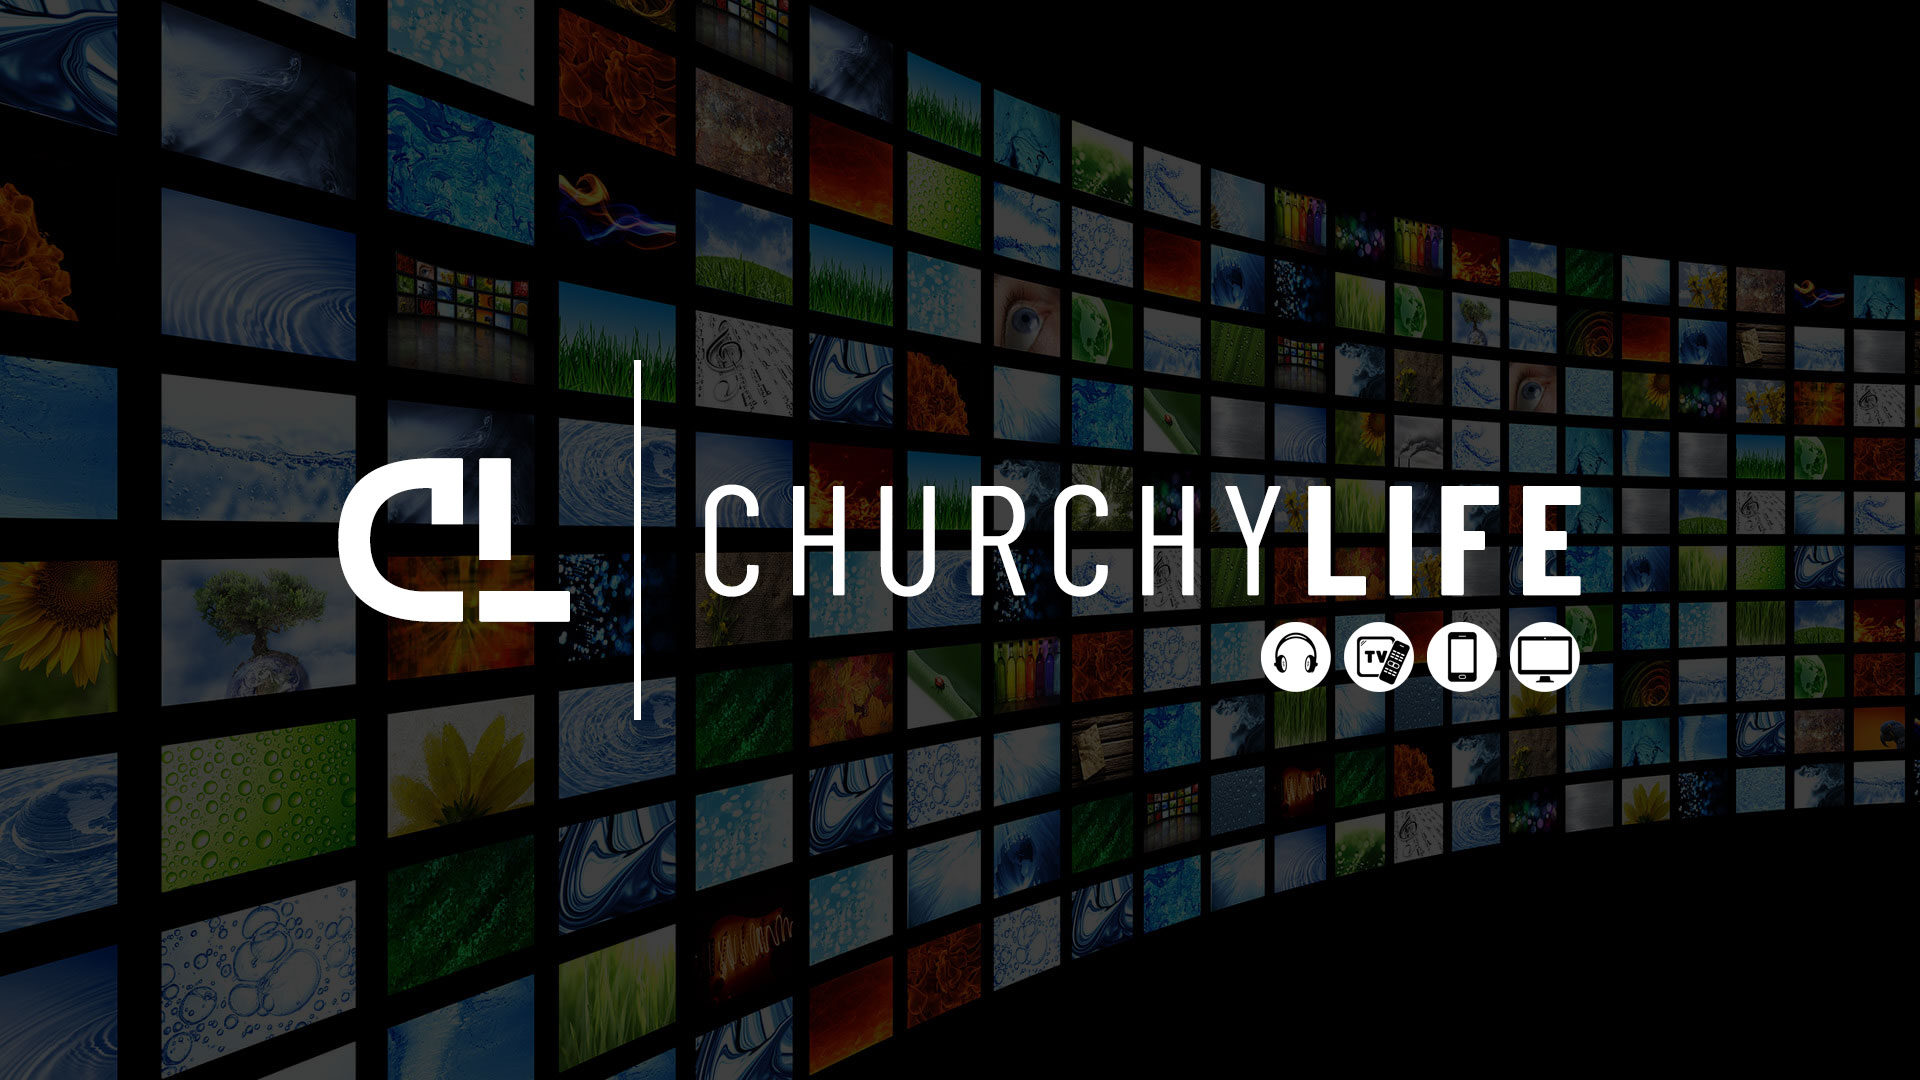 Churchy Life is a digital media platform, focused on Christian entertainment. We're the home of Church Funny, Churchy Date, and the brand new Churchy Life Podcast.